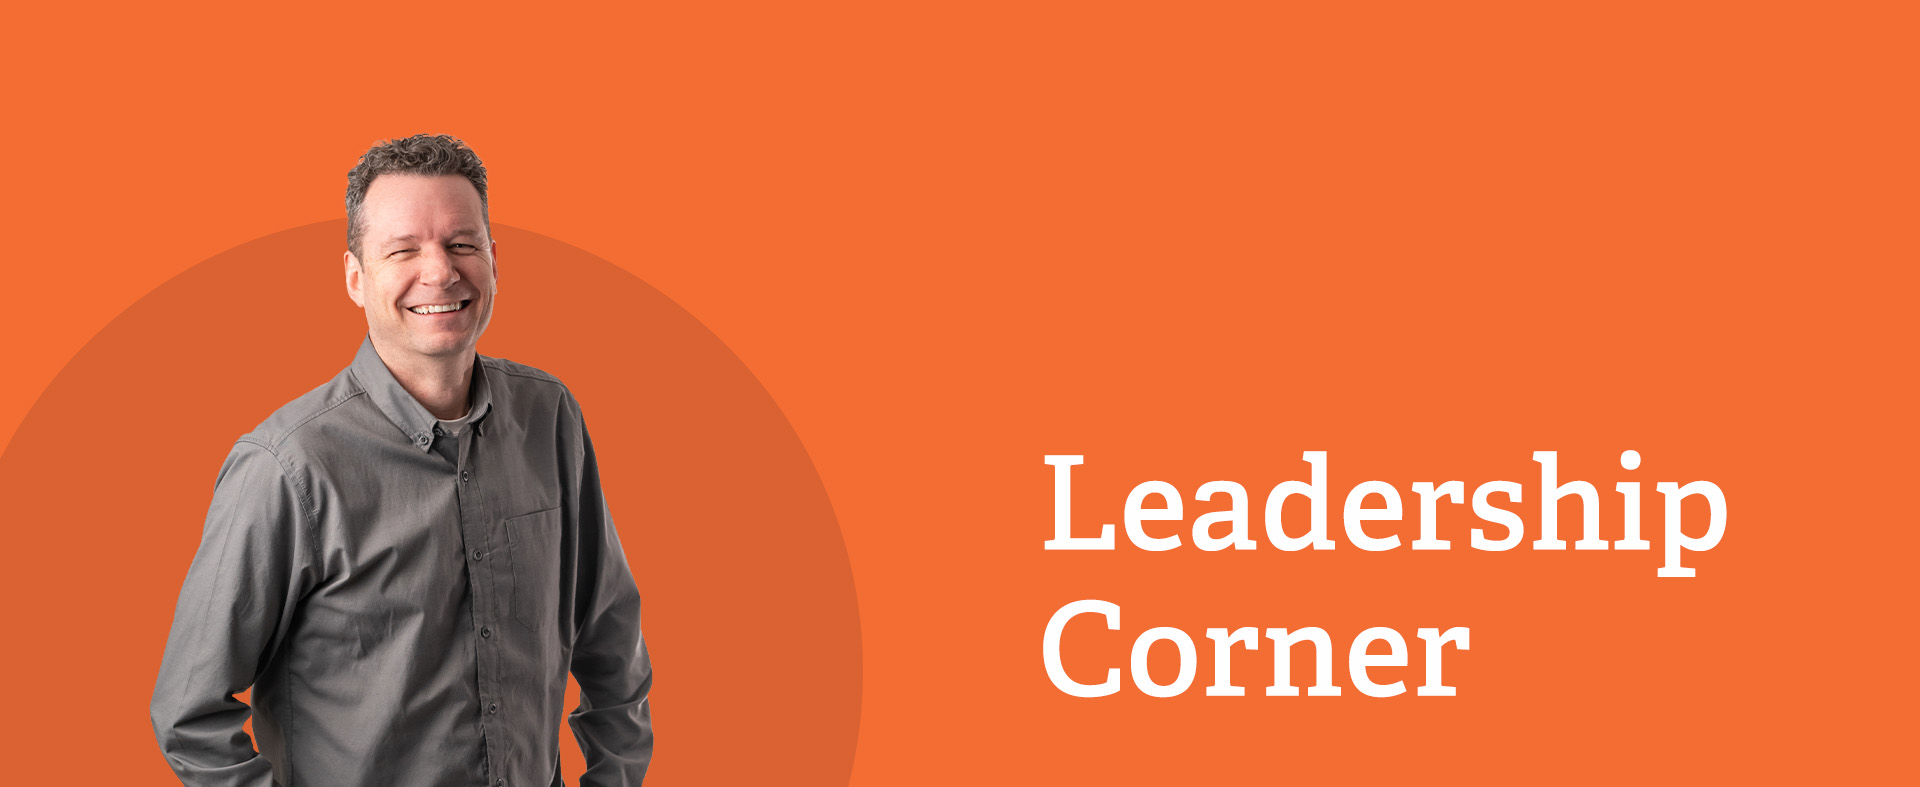 New Leadership Corner Video with DKY President Brian Dahl